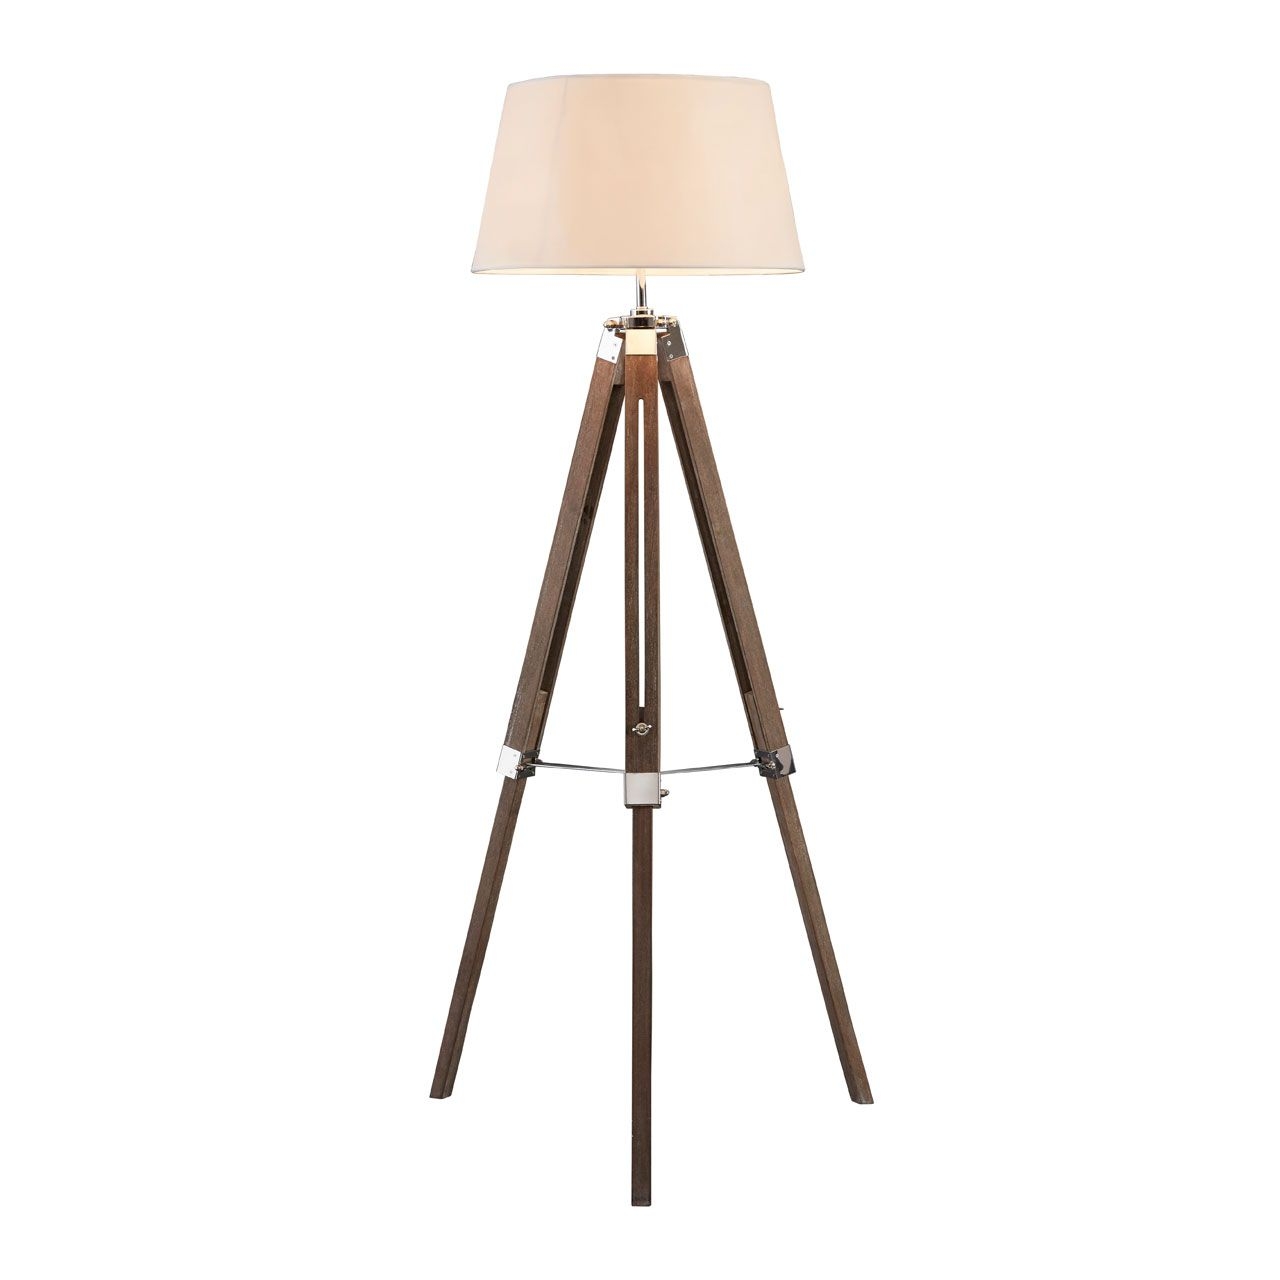 Bailey Cream Fabric Shade Floor Lamp With Brown Wooden Tripod Base